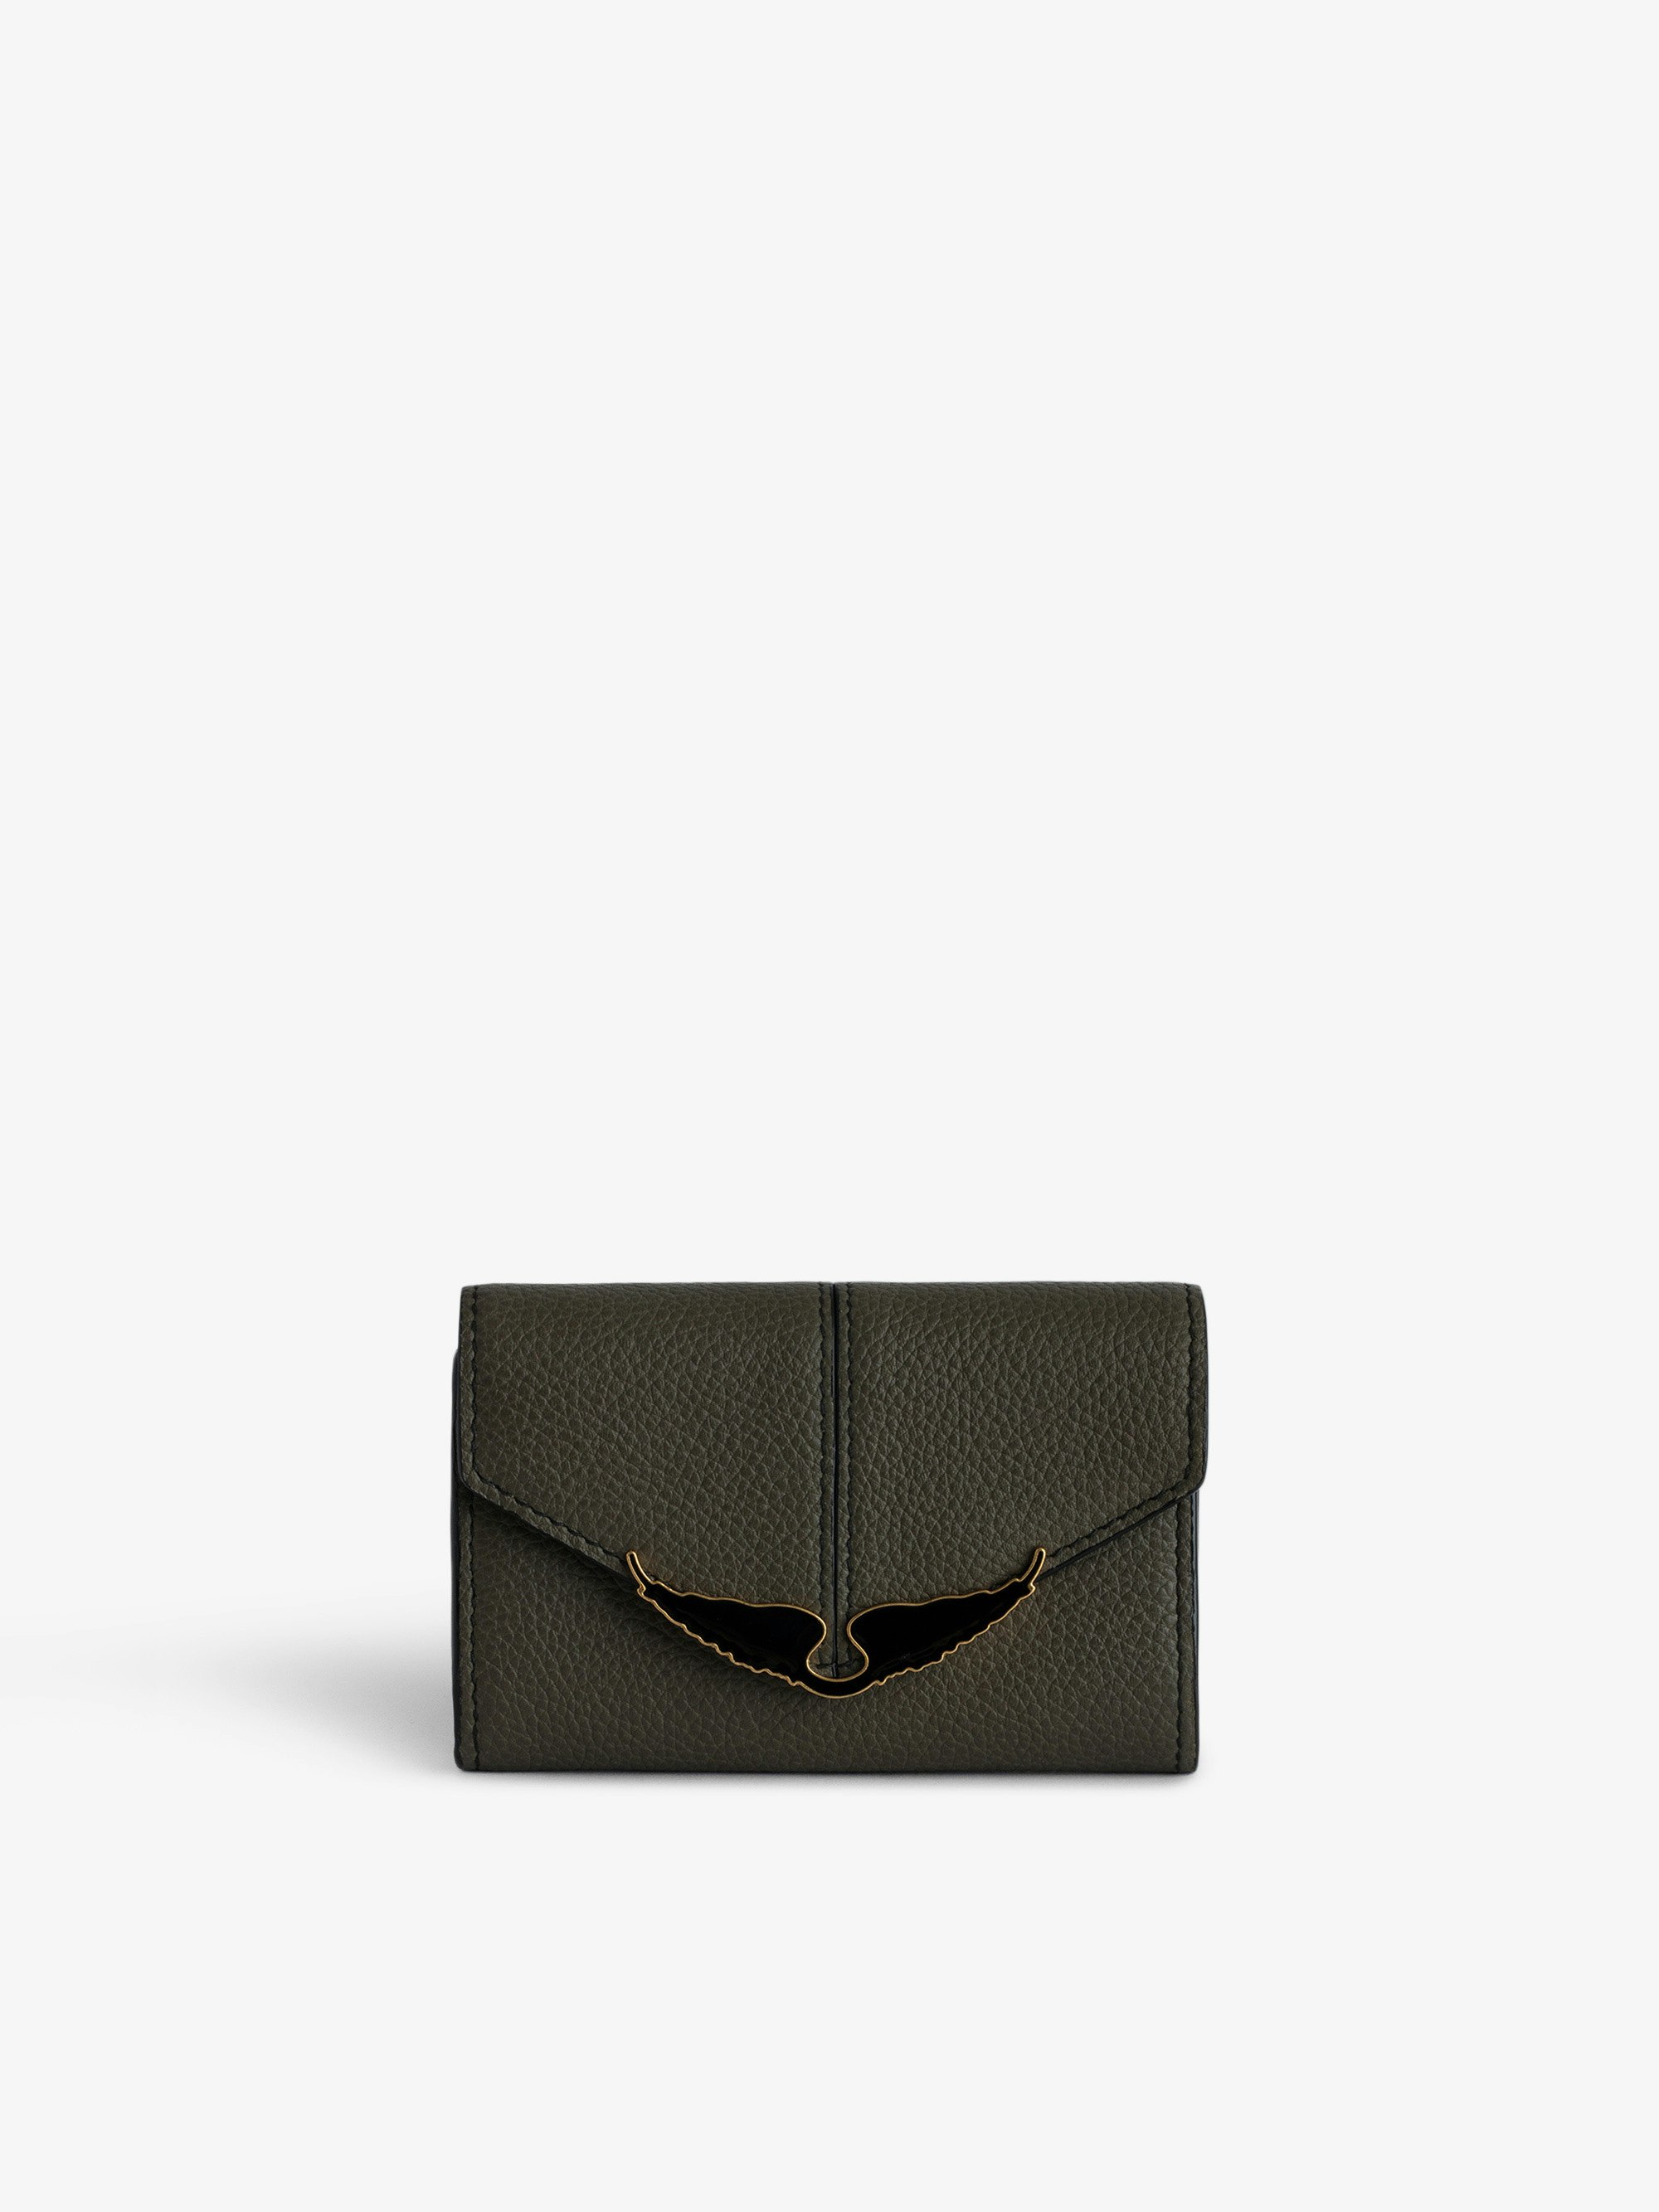 Borderline Wallet - Small khaki grained leather wallet with flap and lacquered wings.